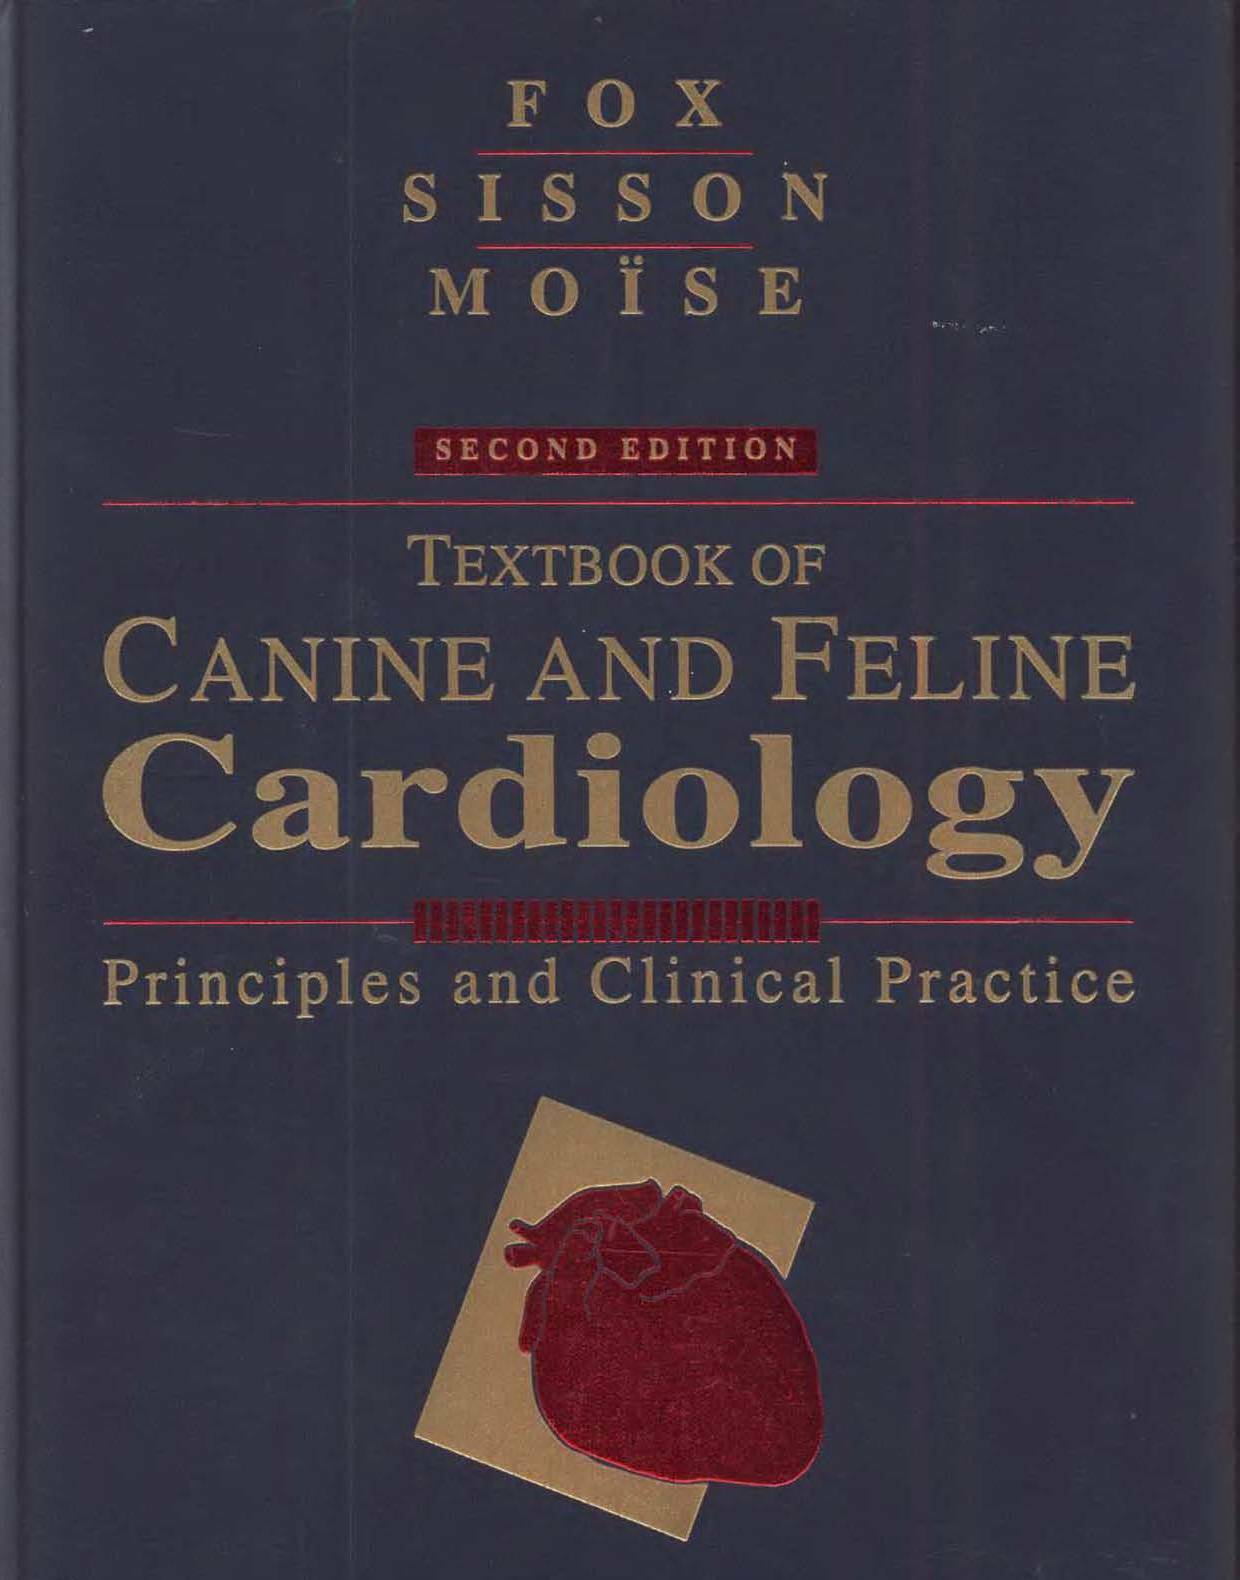 Textbook Of Canine And Feline Cardiology Principles And Clinical Practice, 2nd Edition